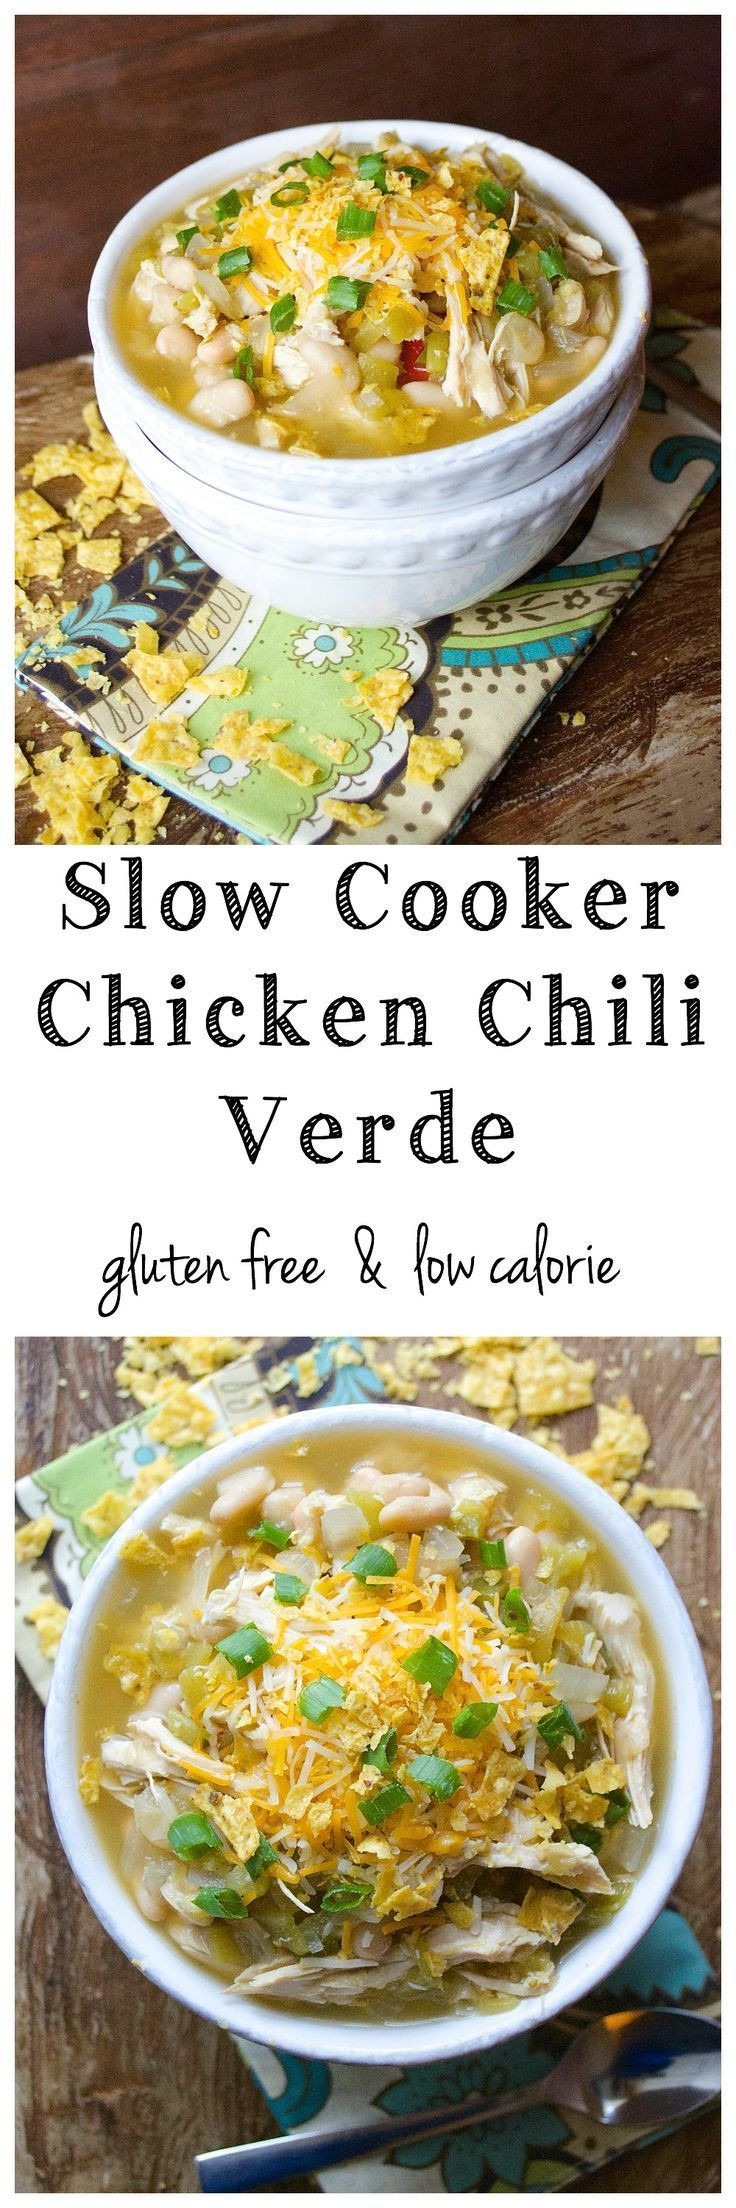 Low Calorie Soup Recipes For Slow Cookers
 Slow Cooker Chicken Chili Verde This super easy soup is